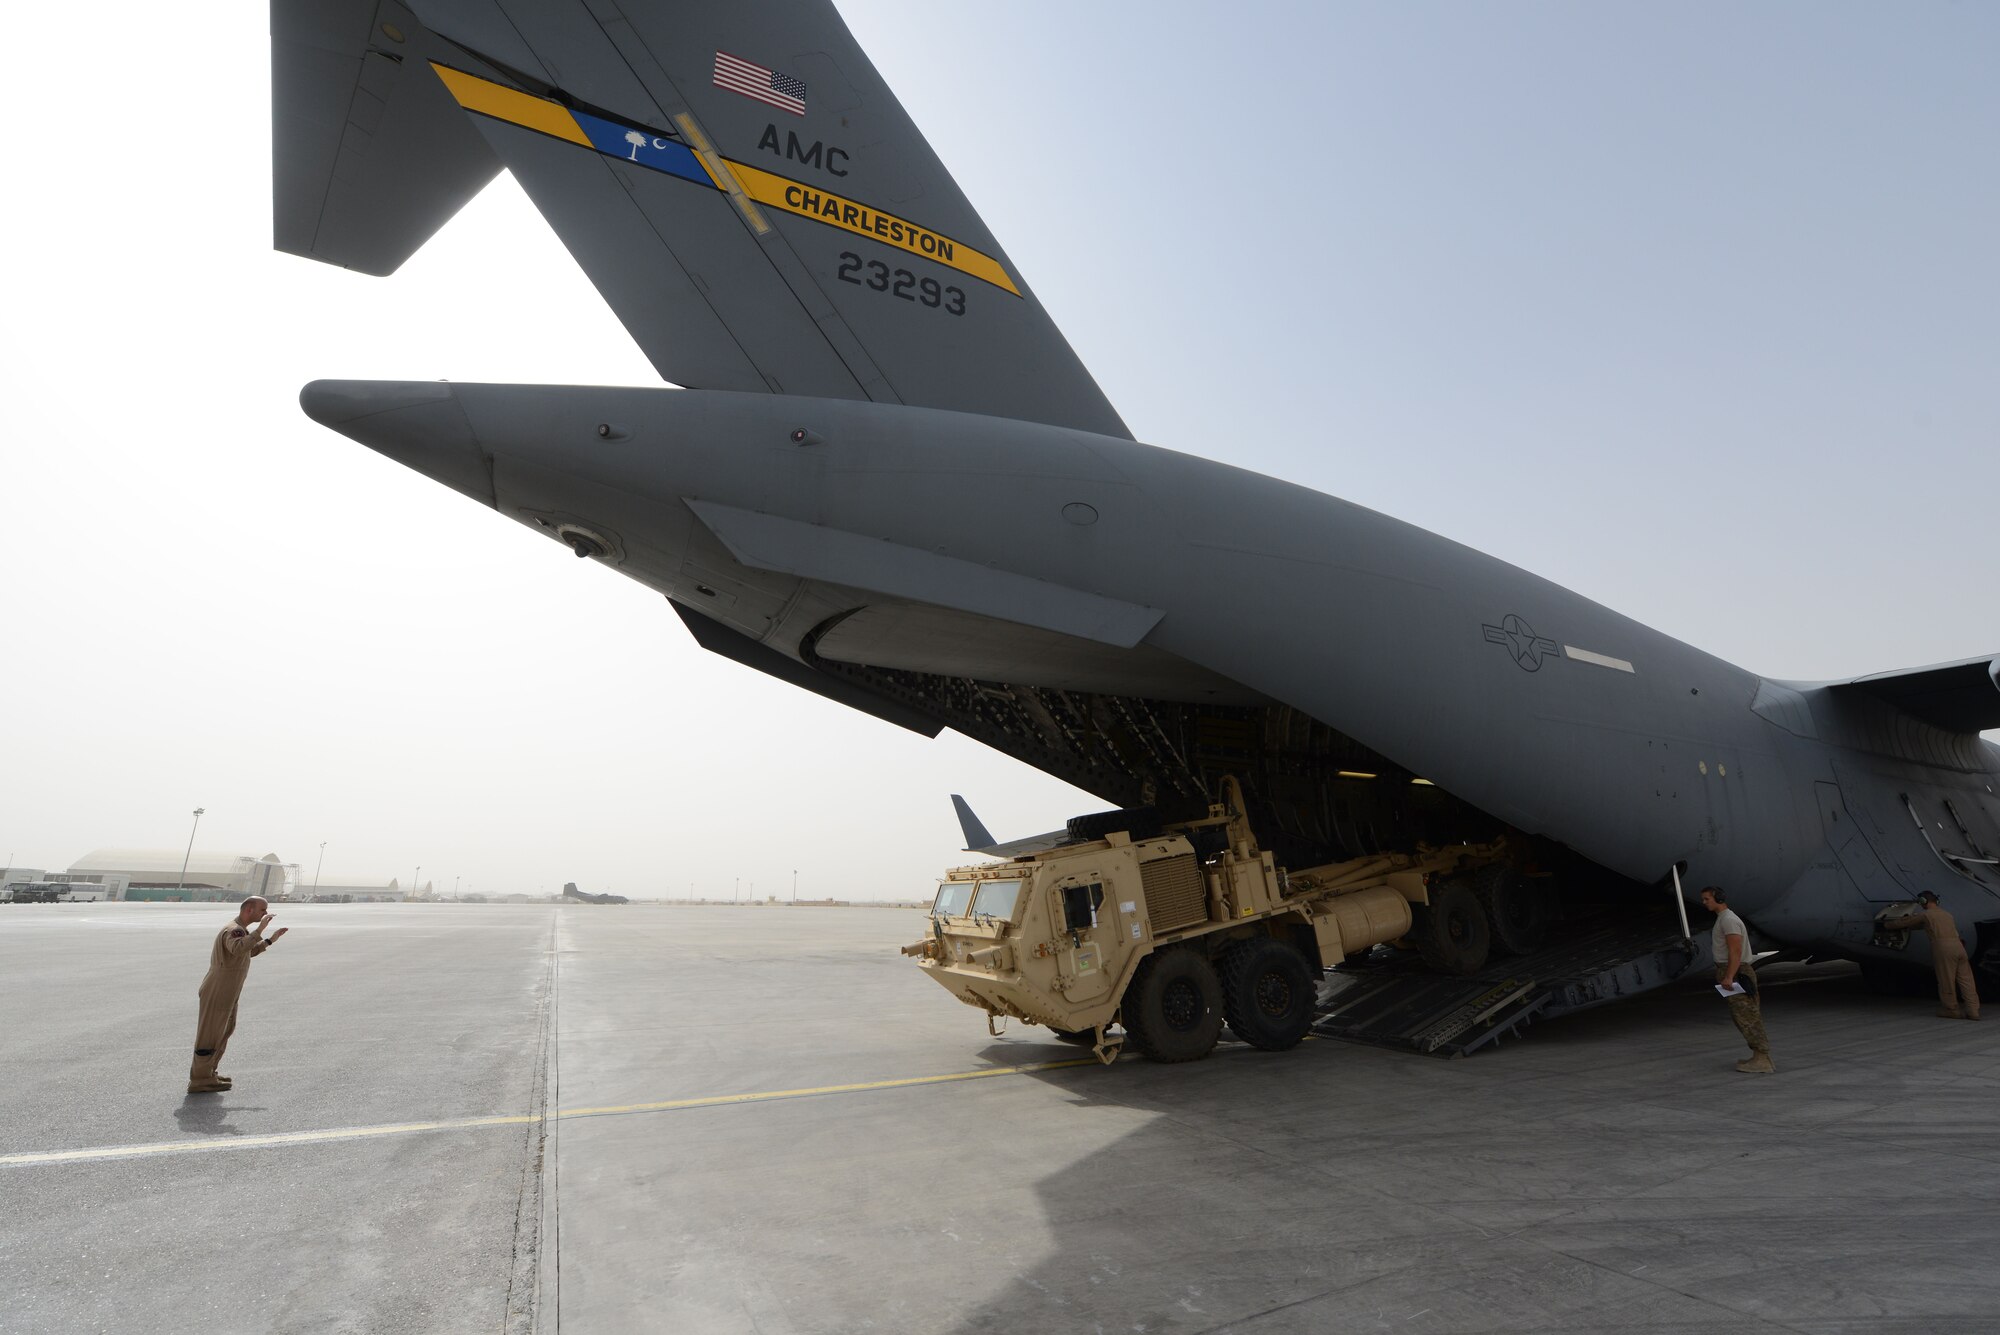 U.S. Air Force Staff Sgt. Doug Wattier, a loadmaster assigned to 816th Expeditionary Airlift Squadron, Detachment 2, directs the driver of a Heavy Expanded Mobility Tactical Truck as he backs onto a C-17 Globemaster III while at Mazar-e Sharif, Afghanistan June 24, 2014. Loadmasters are responsible for ensuring the proper loading of vehicles, pallets and equipment on aircraft. Wattier, a native of Jacksonville, N.C. is deployed from the 317th Airlift Squadron at Joint Base Charleston, S.C. (U.S. Air Force photo by Master Sgt. Cohen A. Young/Released)  